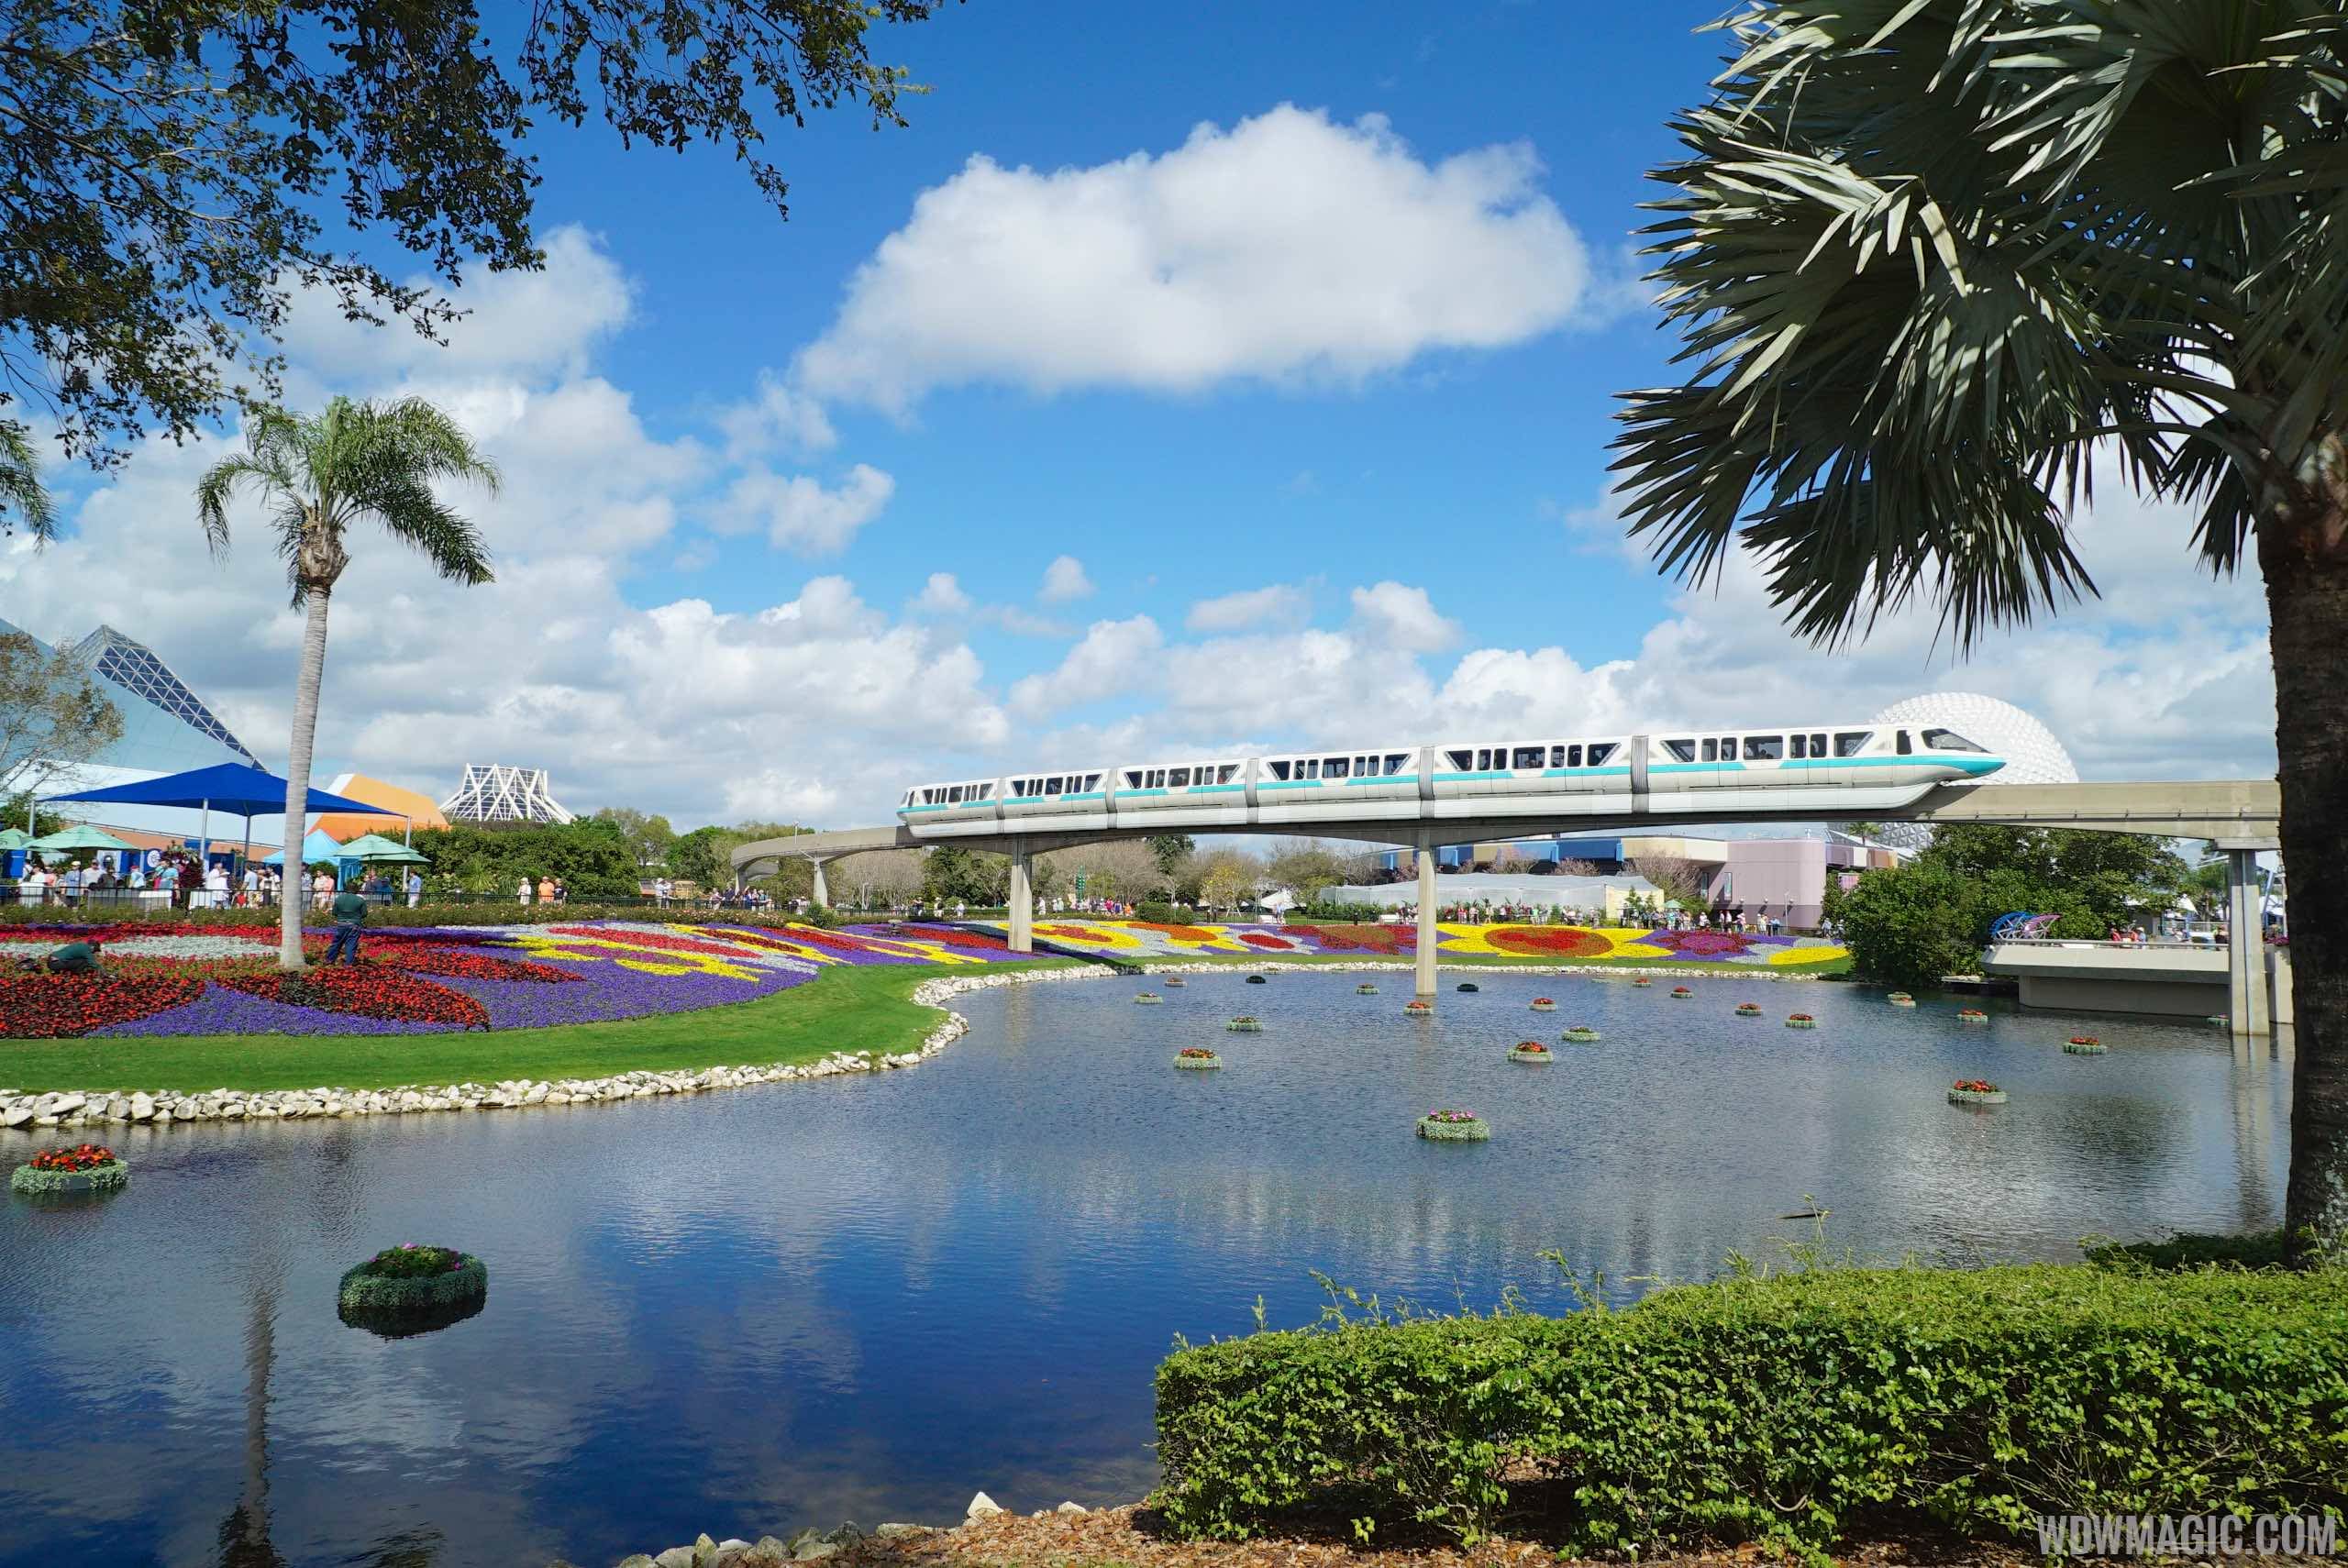 Monorails will soon be a common sight once again at EPCOT